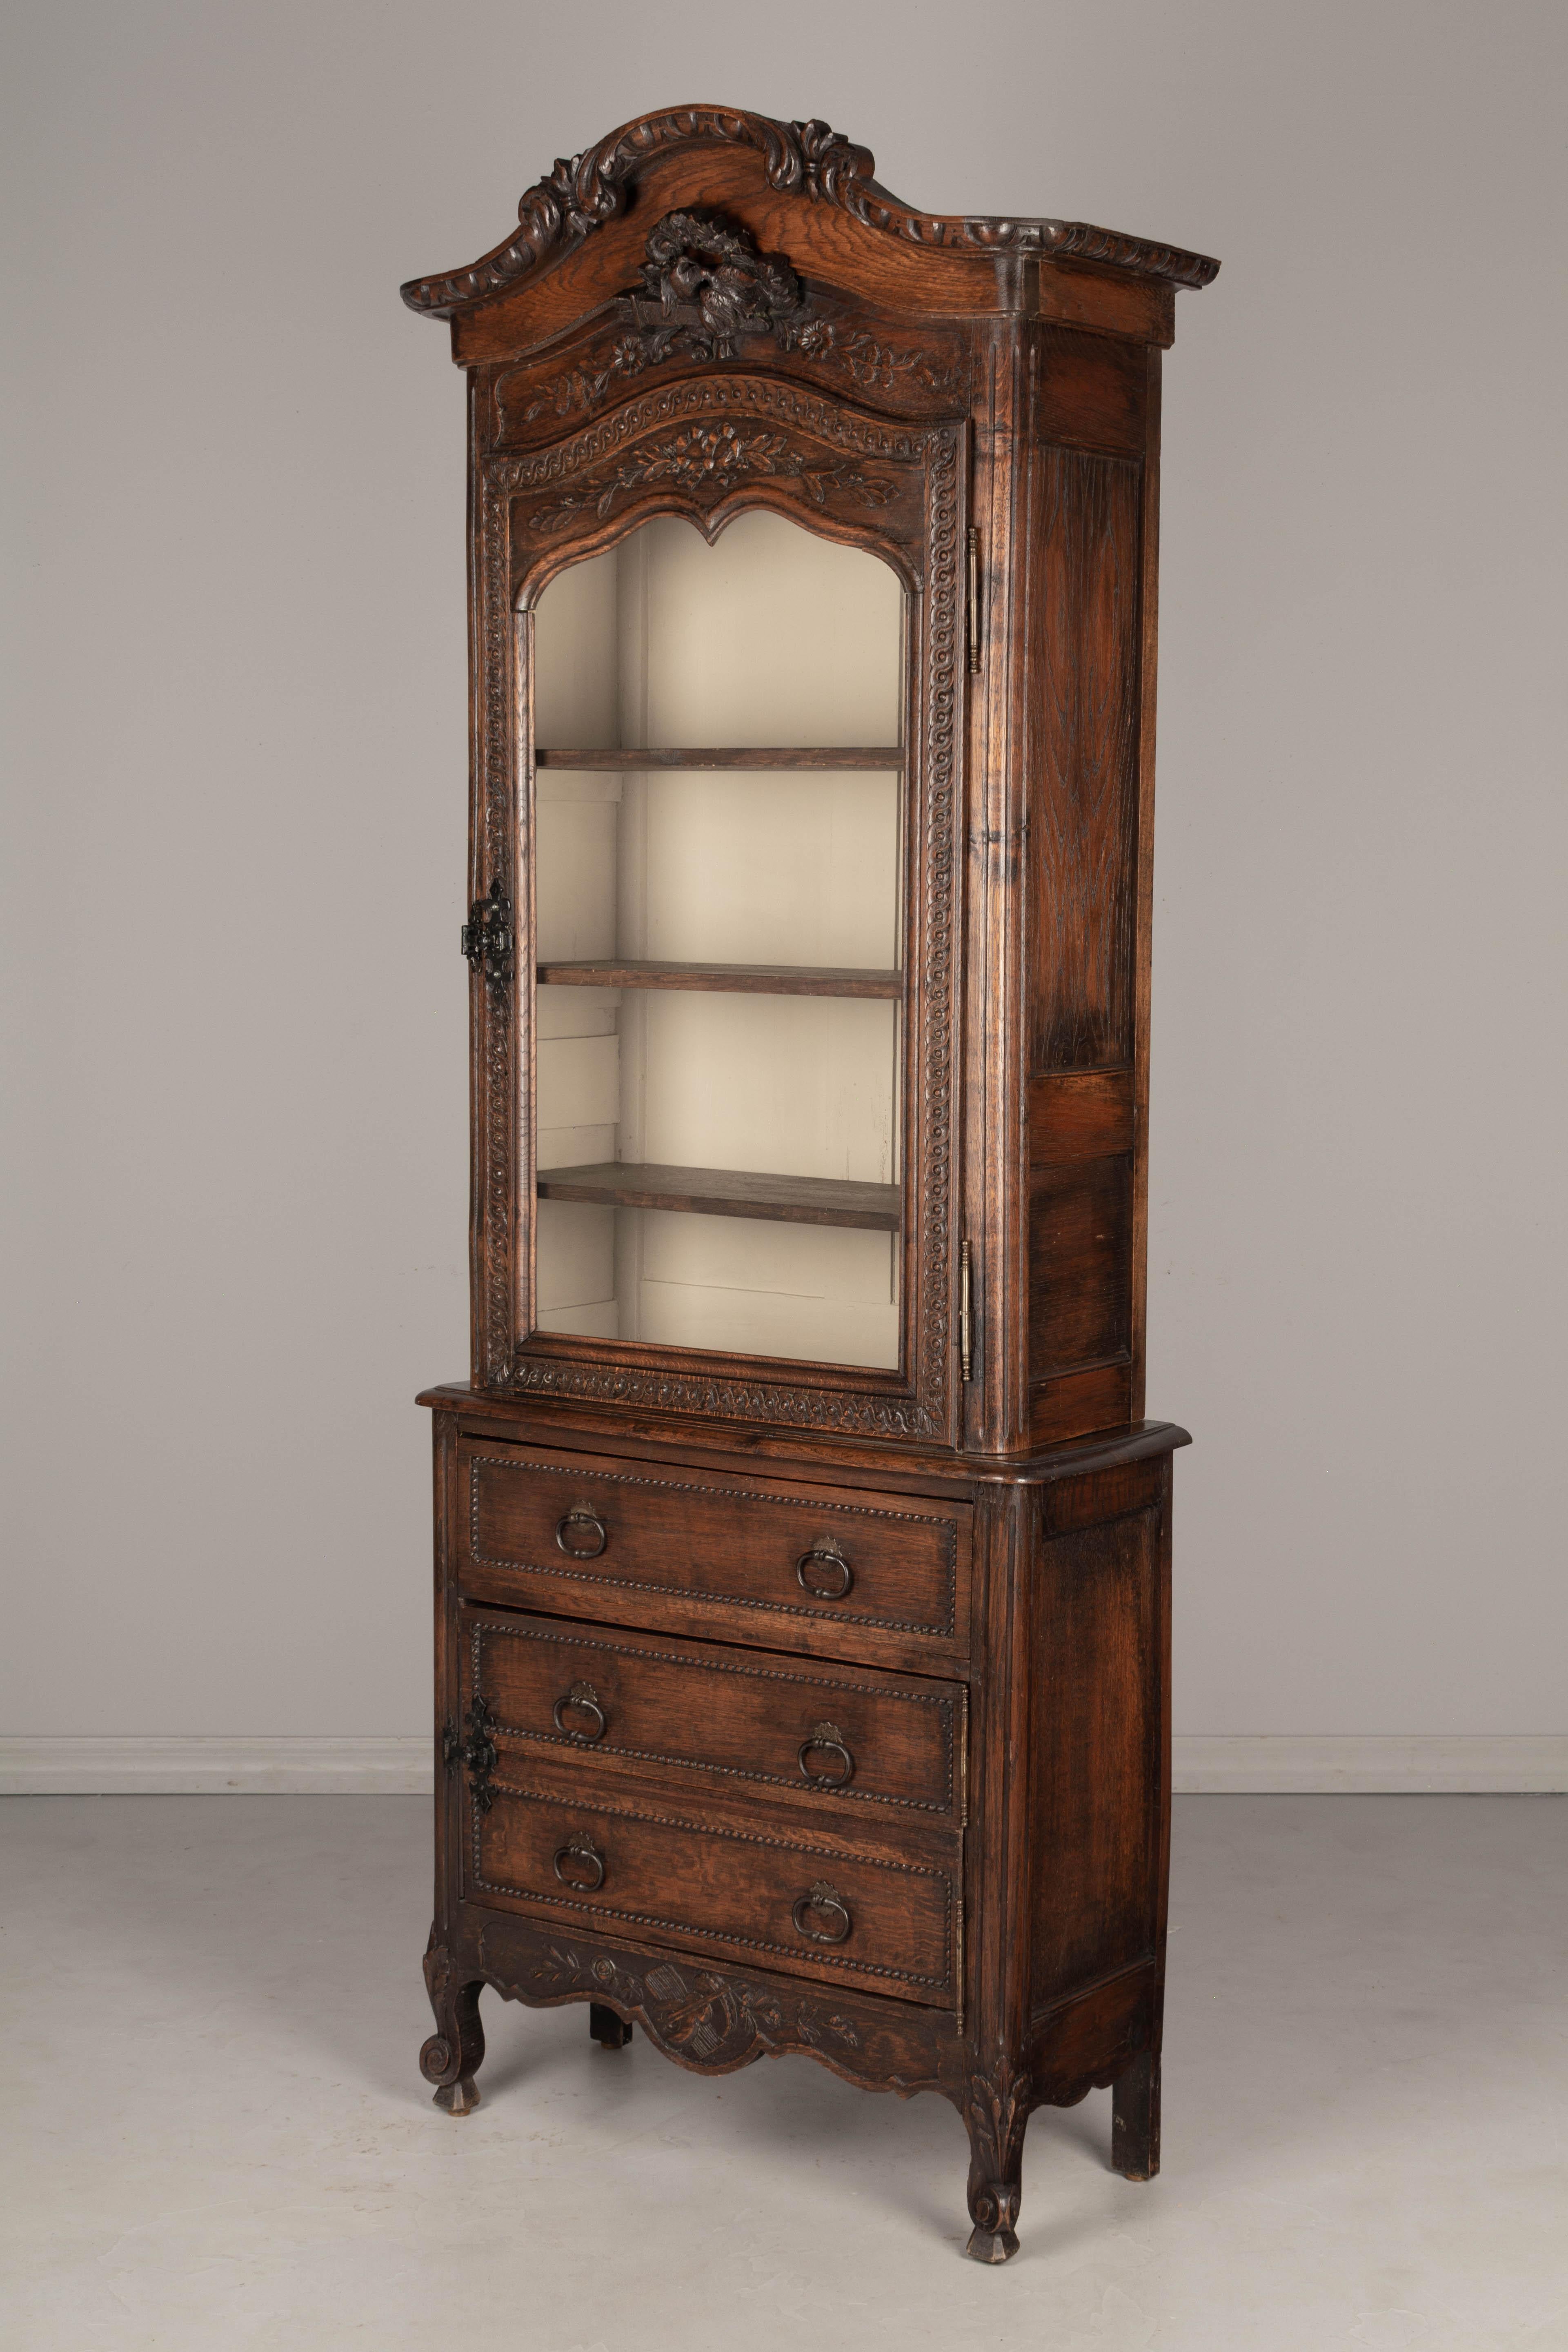 French 19th Century Louis XV Style Bonnetiére or Display Cabinet For Sale